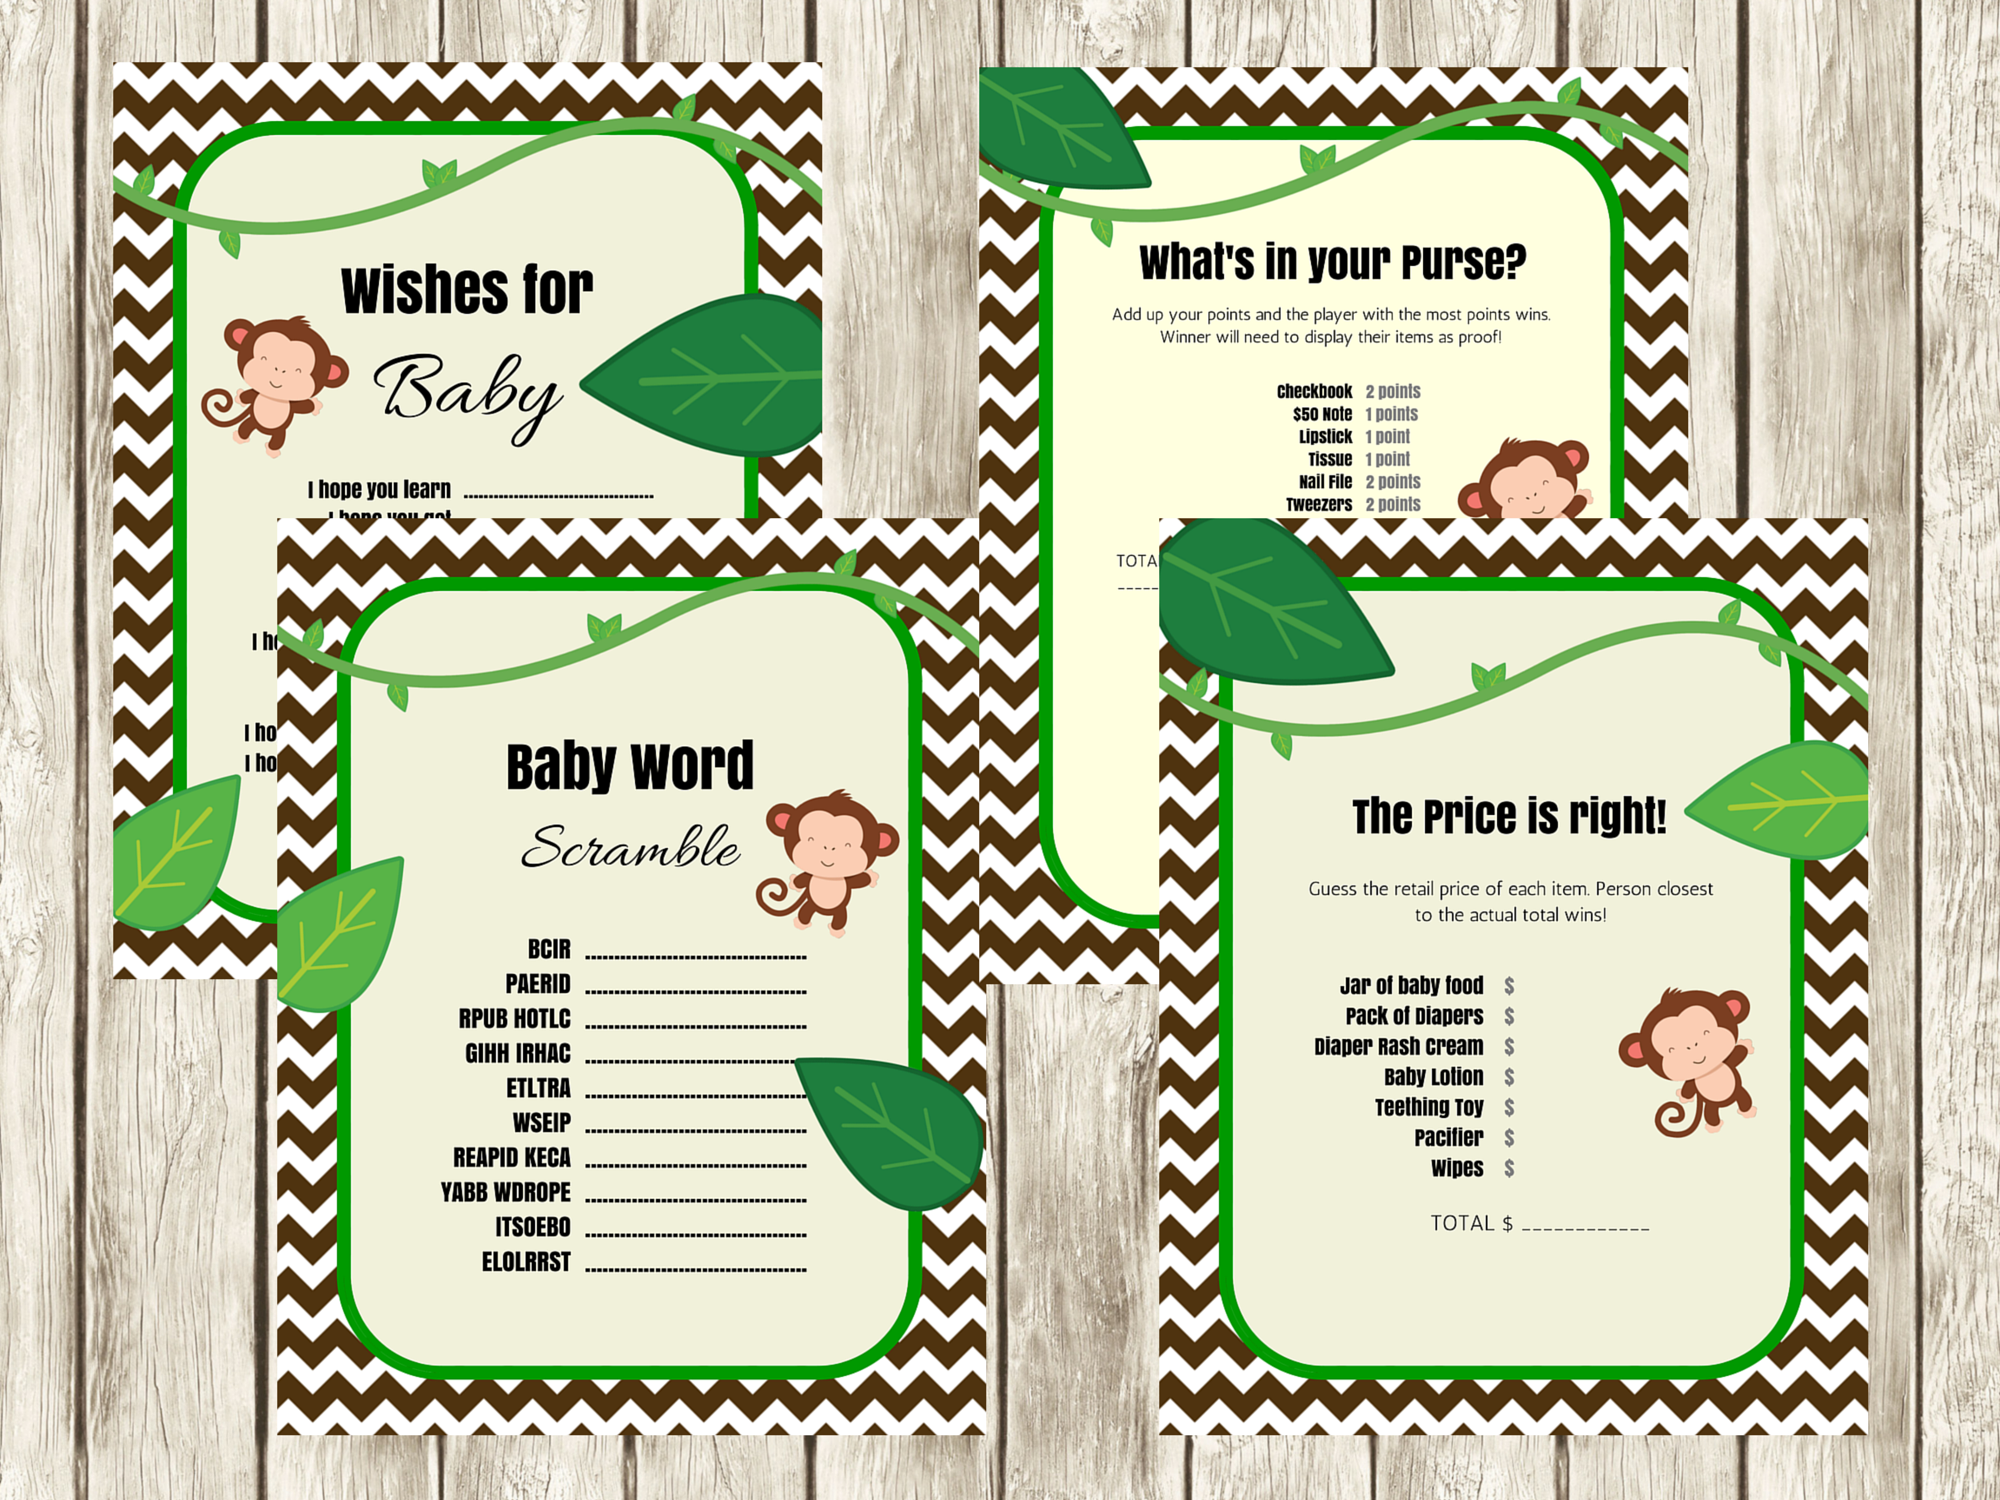 Free Printable Baby Shower Games - Download Instantly!  Baby shower fun,  Free printable baby shower games, Baby shower printables